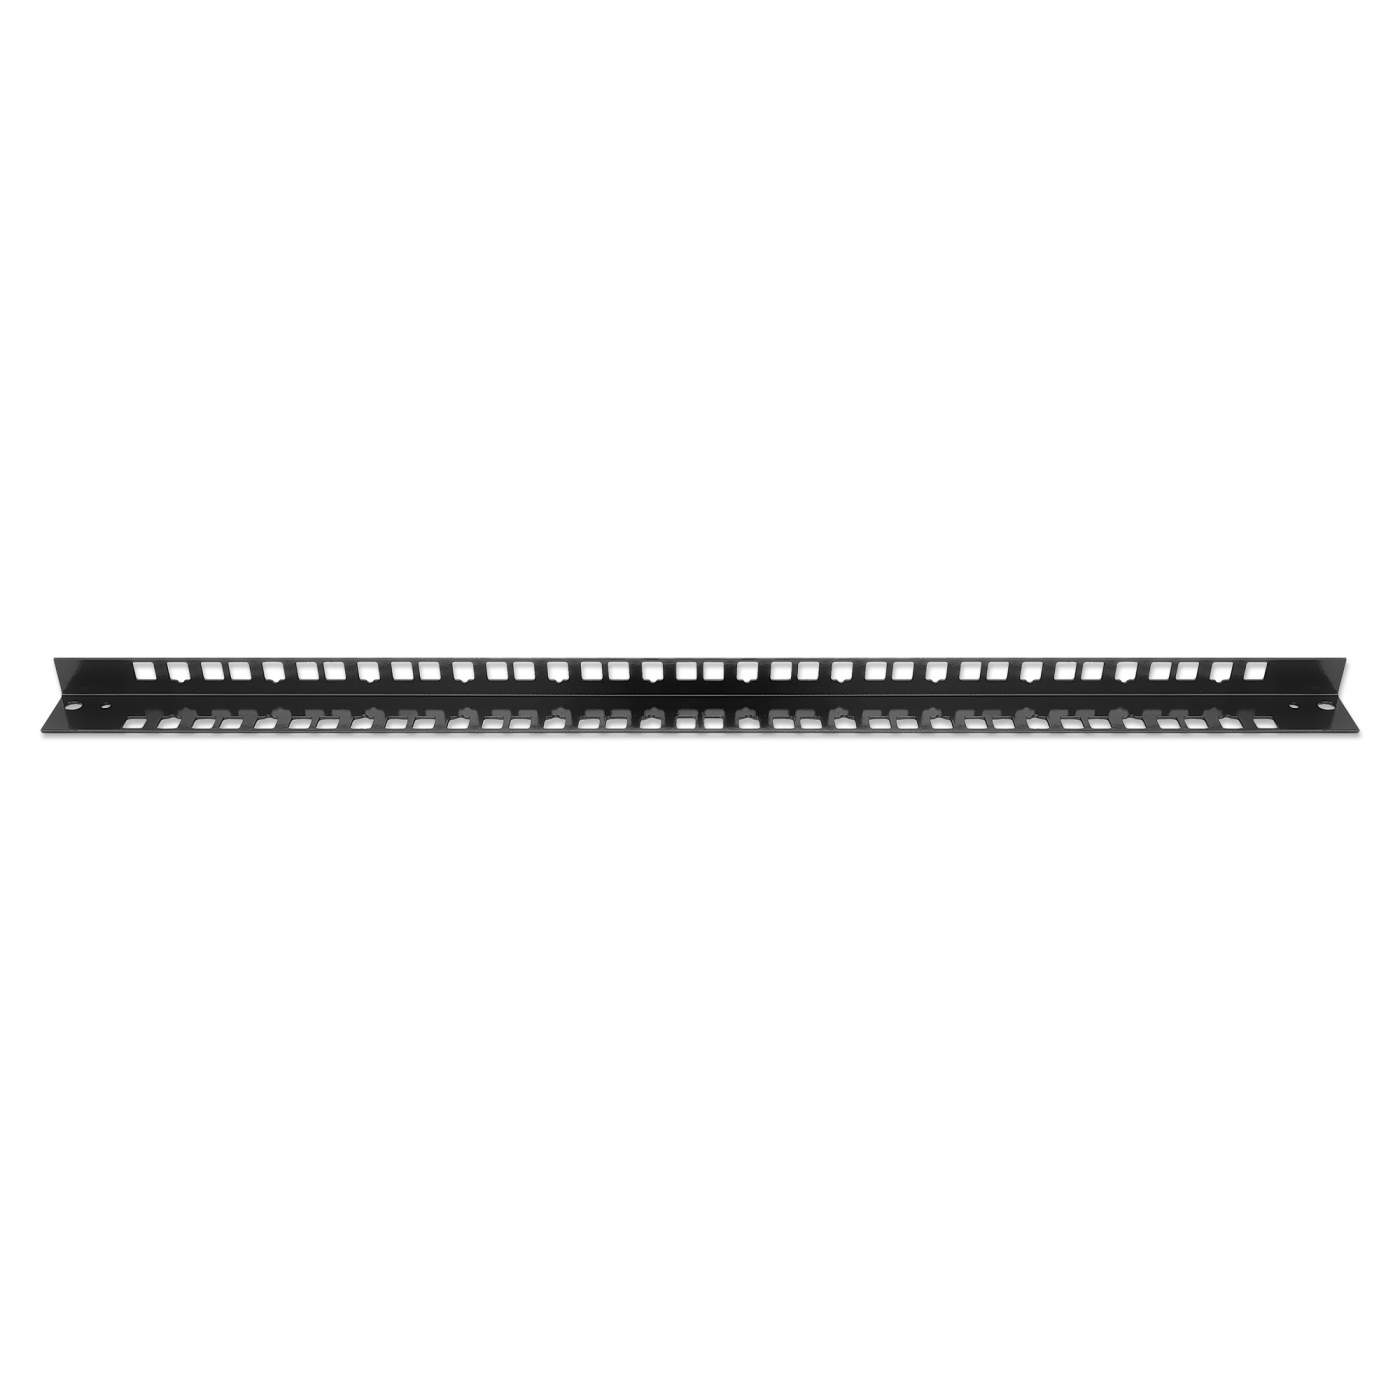 Spare Rails for 19" Wallmount Cabinets, 12U Image 3